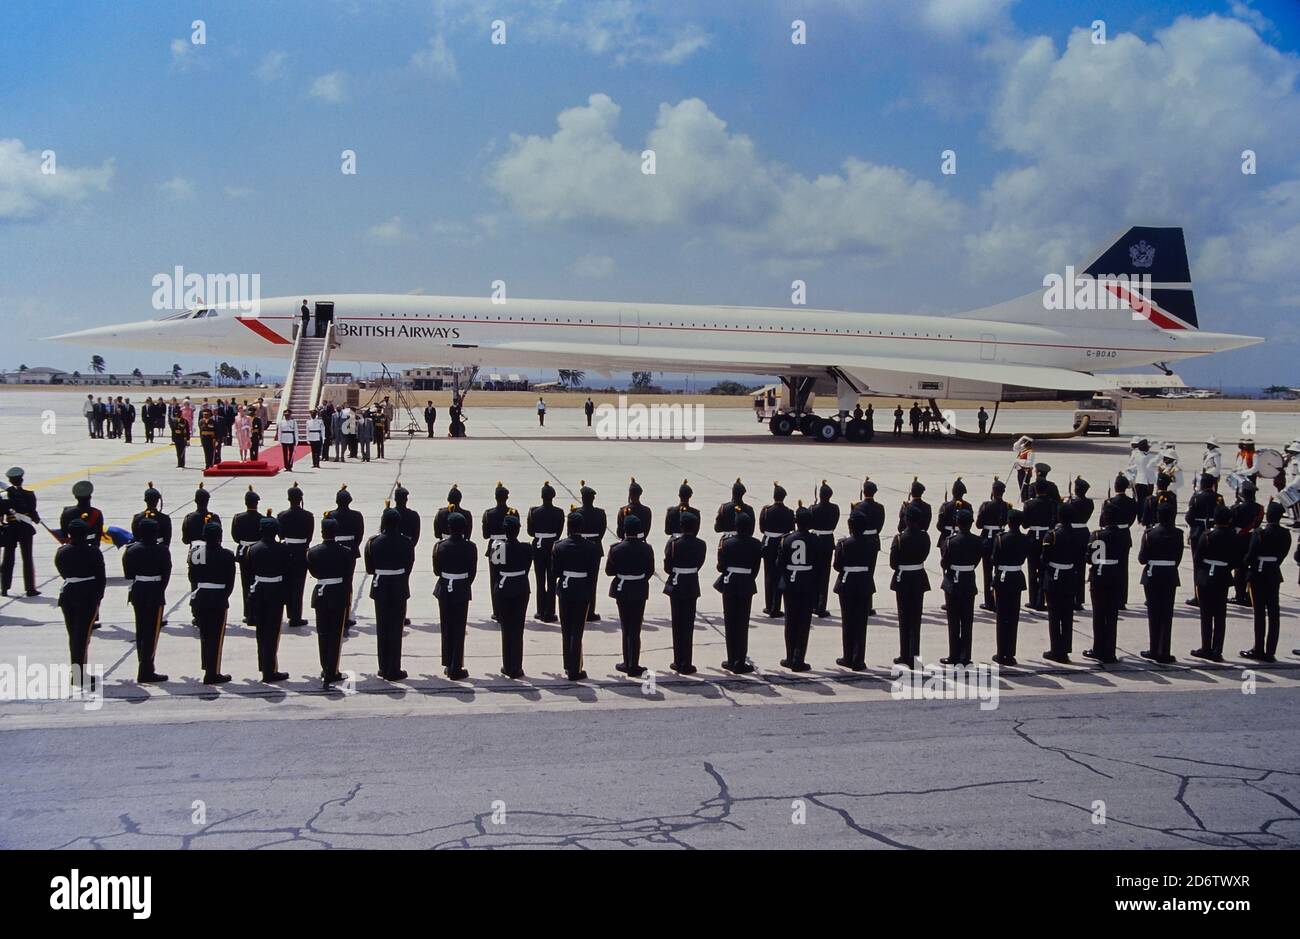 Queen Elizabeth II  and Prince Philip at the airport leaving ceremony in Barbados before departing in different directions, March 11, 1989. The Queen returned to England via British Airways Concorde while Prince Philip went on to Bermuda to present the Duke of Edinburgh awards. They were on the Caribbean island for a four-day visit. Stock Photo